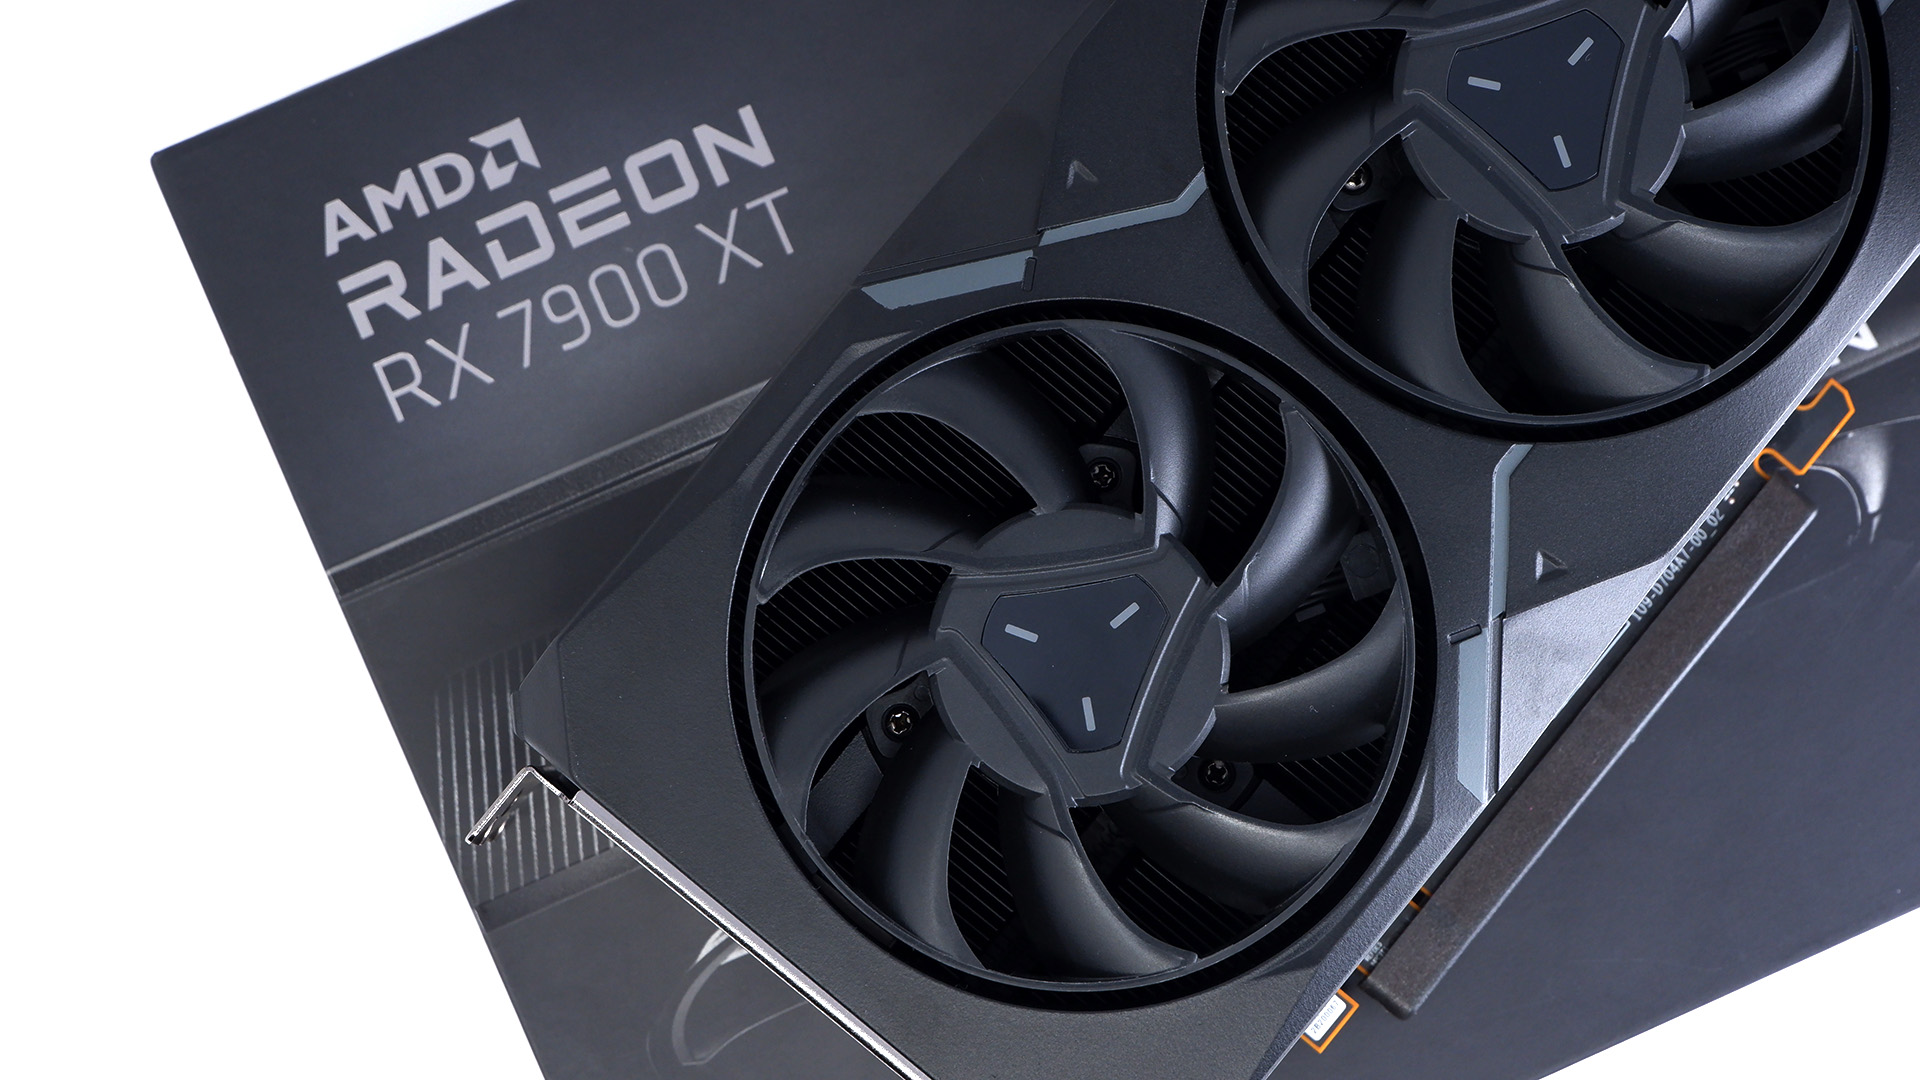 AMD's RX 7900 XT is on sale under MSRP only two months after release